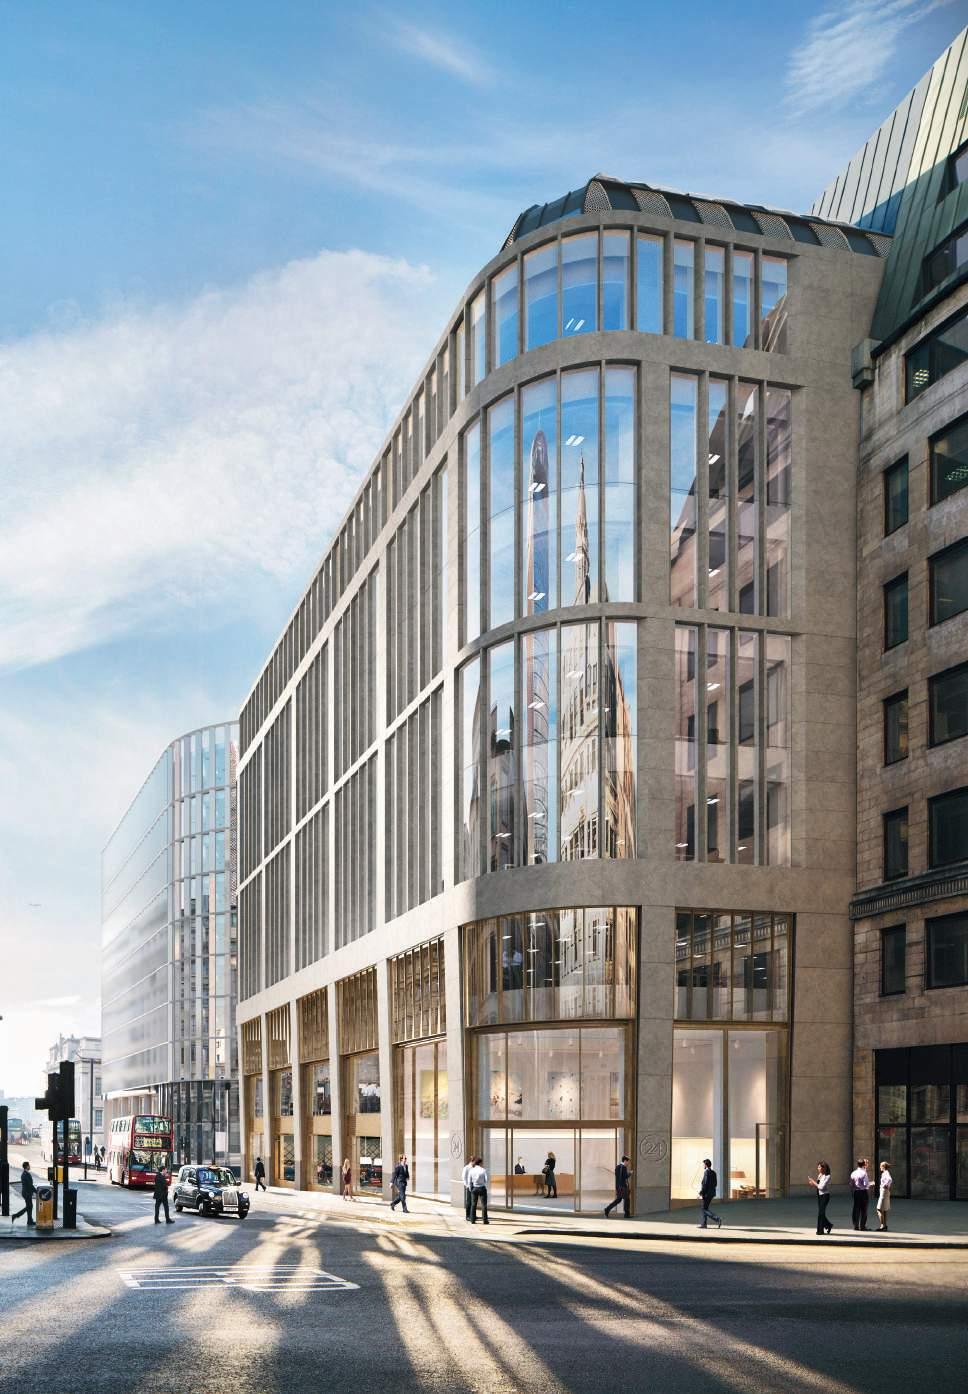 THE TEAM Embassy Works, Vauxhall SW8 - Bmor Hansom, Victoria SW - Bmor King William Street, EC - BAA King William Street, EC - BAA development at Graphite Square is led by a consortium of three